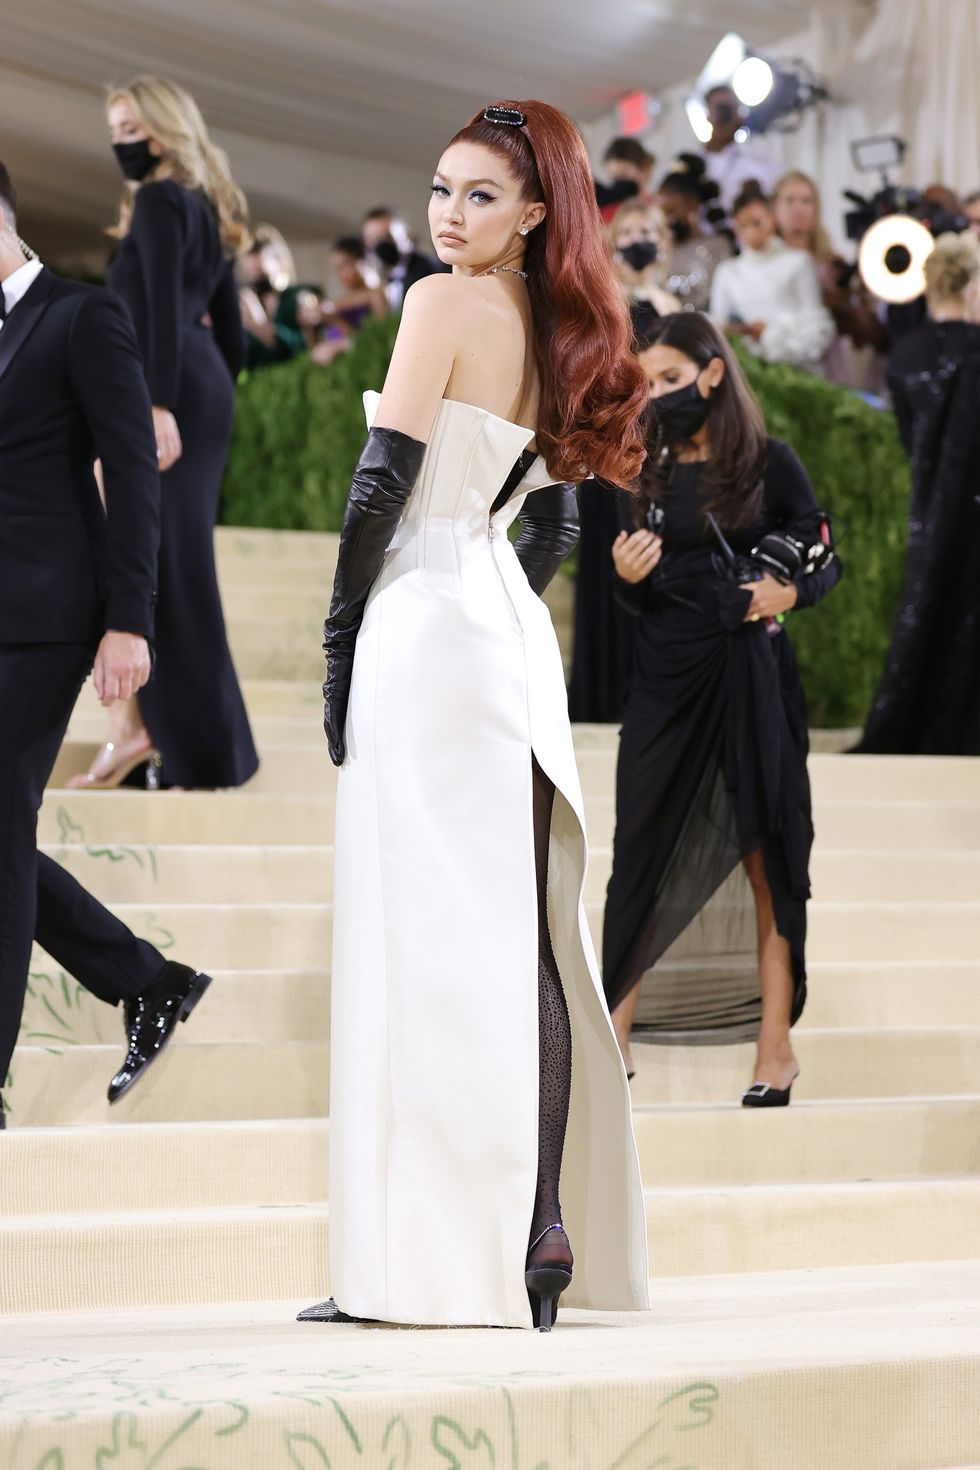 Gigi Hadid Served 60s Glamour With Red Hair at the 2021 Met Gala